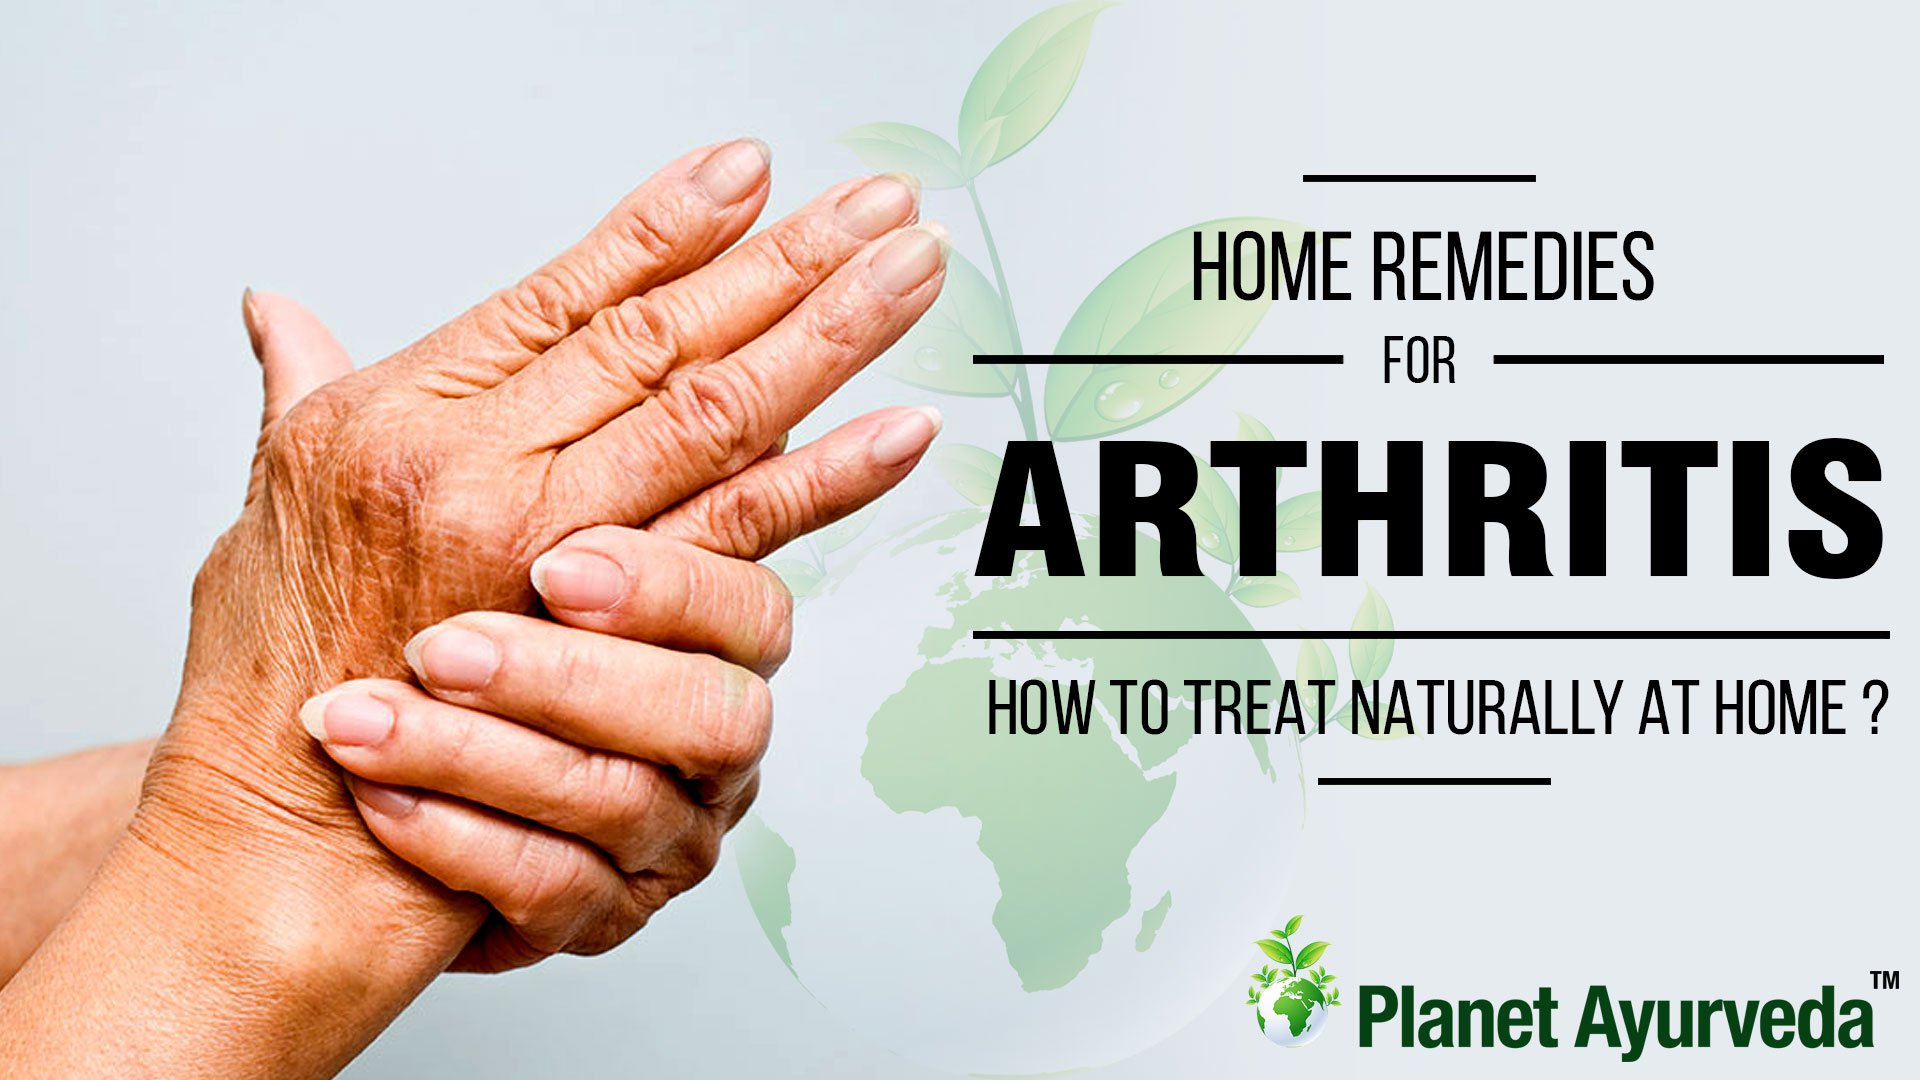 How to Treat Arthritis Naturally at Home